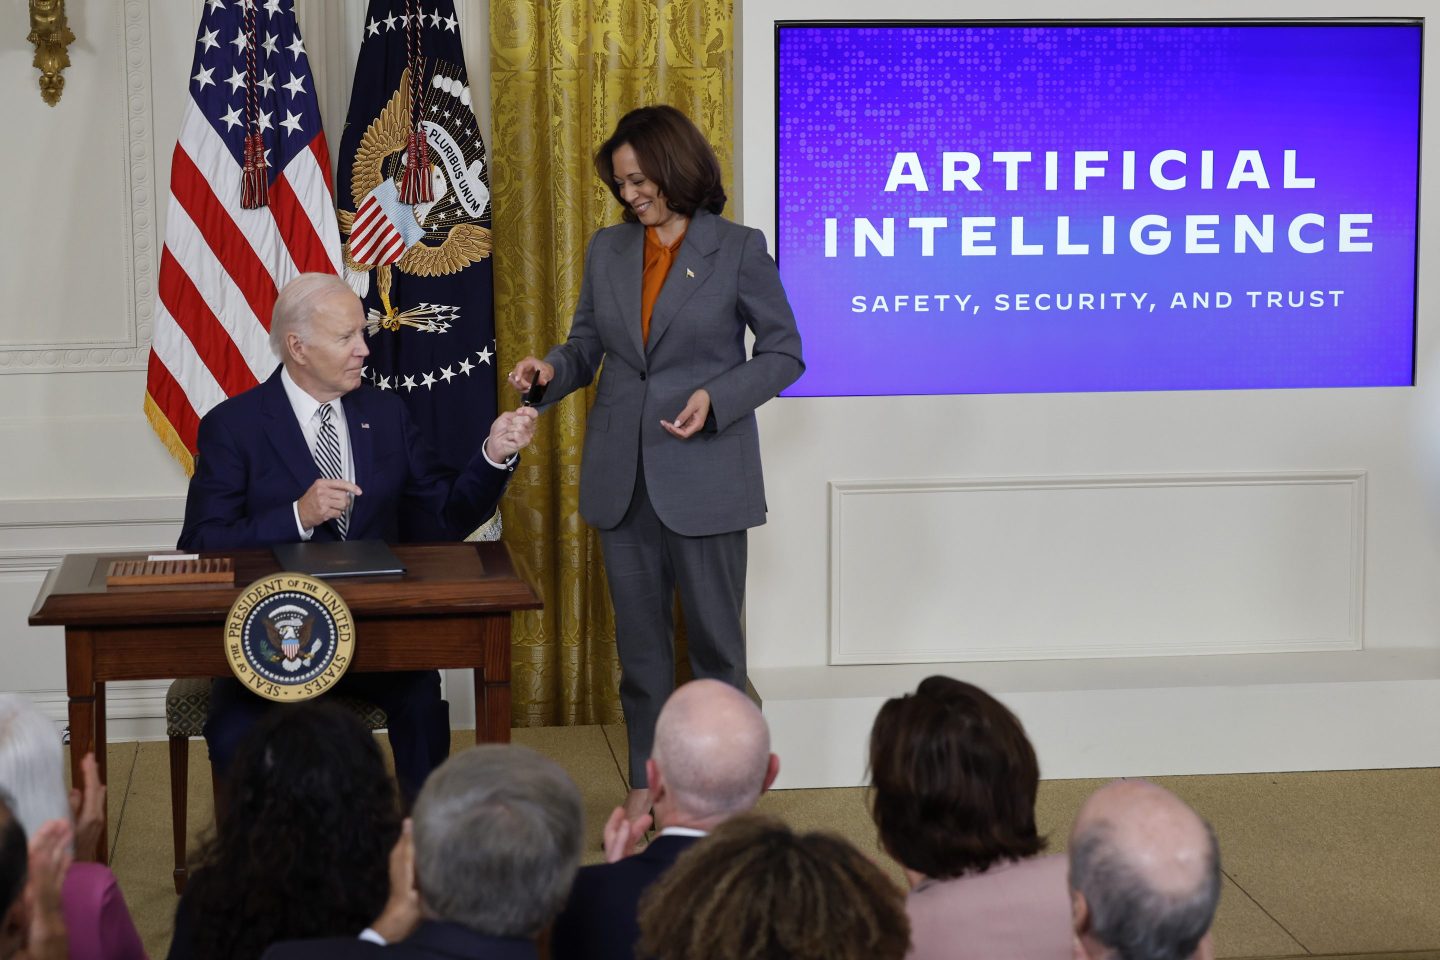 WASHINGTON, DC &#8211; OCTOBER 30: U.S. President Joe Biden hands Vice President Kamala Harris the pen he used to sign a new executive order regarding artificial intelligence during an event in the East Room of the White House on October 30, 2023 in Washington, DC. President Biden issued the executive order directing his administration to create a new chief AI officer, track companies developing the most powerful AI systems, adopt stronger privacy policies and &#8220;both deploy AI and guard against its possible bias,&#8221; creating new safety guidelines and industry standards. (Photo by Chip Somodevilla/Getty Images)